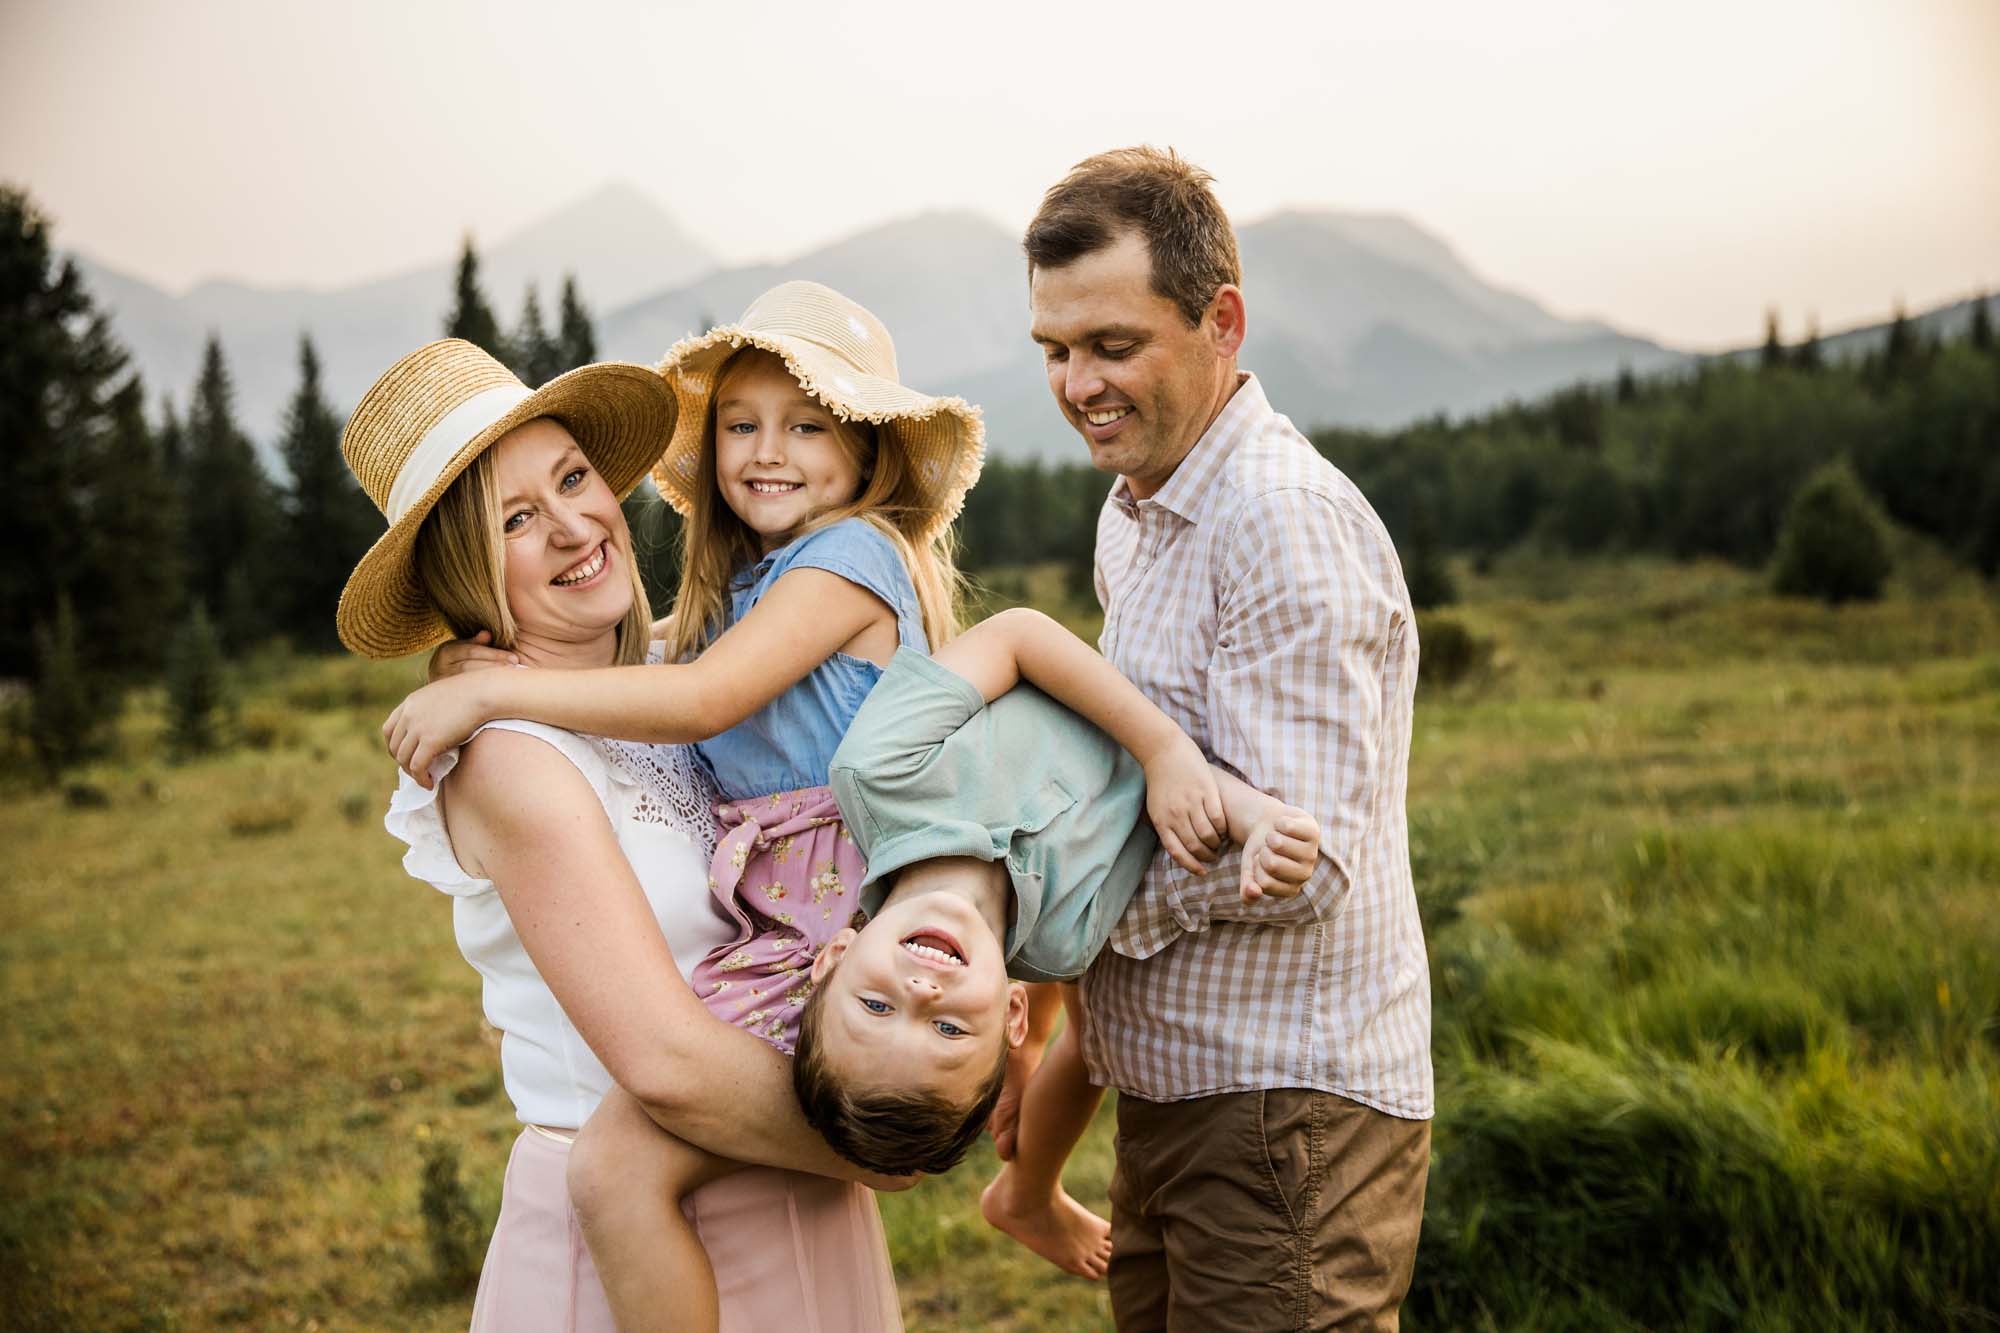 Calgary, Banff and Kananaskis Country lifestyle family photographer, family in front of water and mountains during their photoshoot in Kananaskis Country